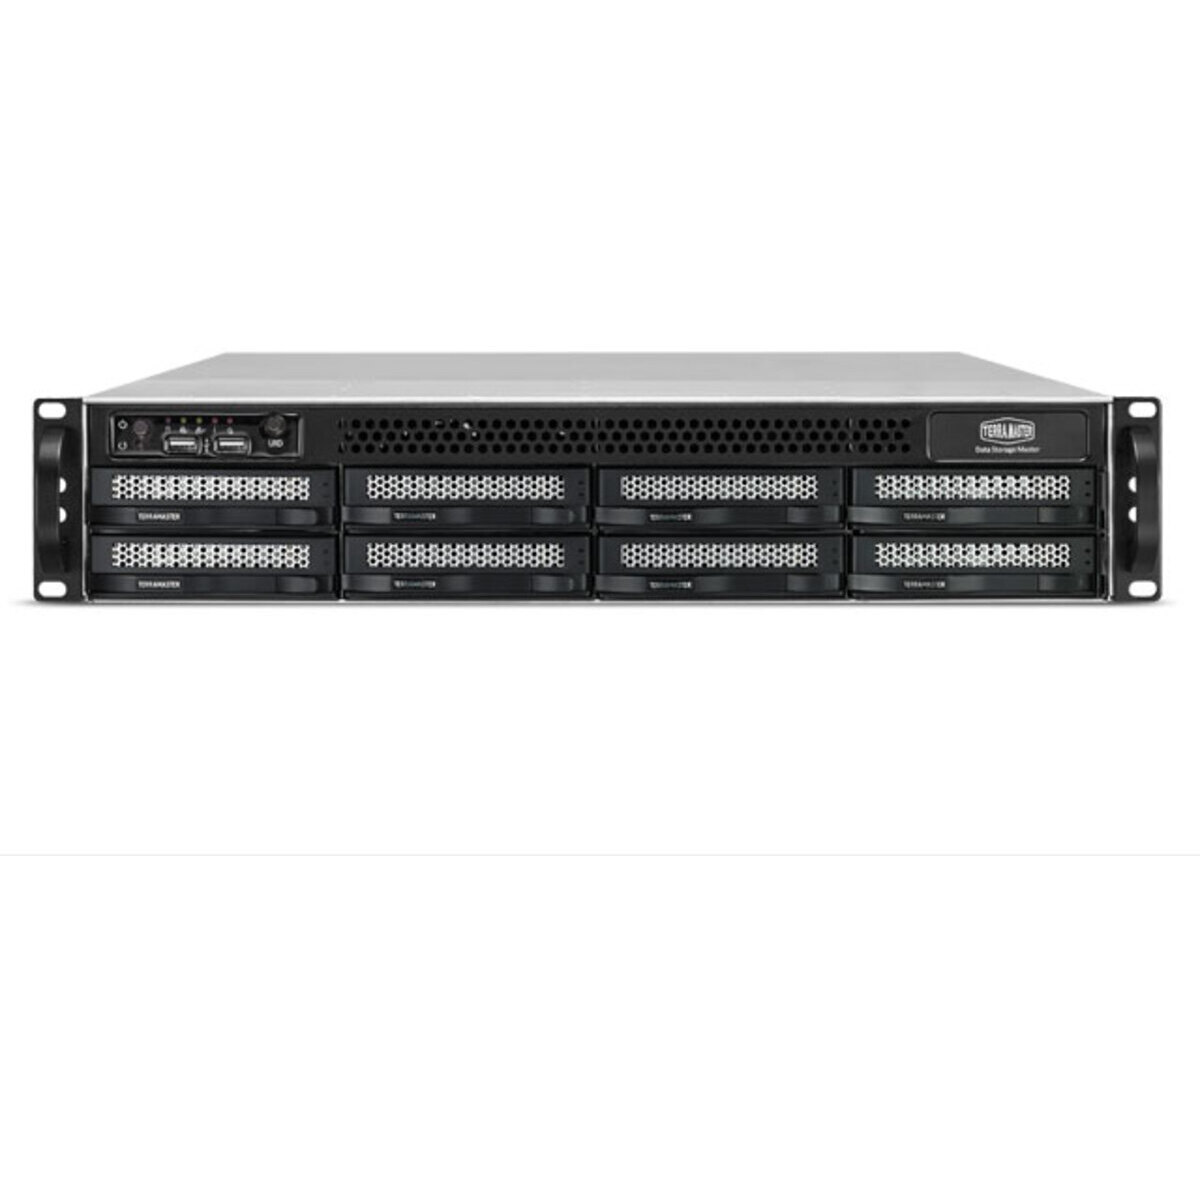 TerraMaster U8-522-9400 60tb 8-Bay RackMount Large Business / Enterprise NAS - Network Attached Storage Device 6x10tb Seagate IronWolf Pro ST10000NT001 3.5 7200rpm SATA 6Gb/s HDD NAS Class Drives Installed - Burn-In Tested - ON SALE U8-522-9400